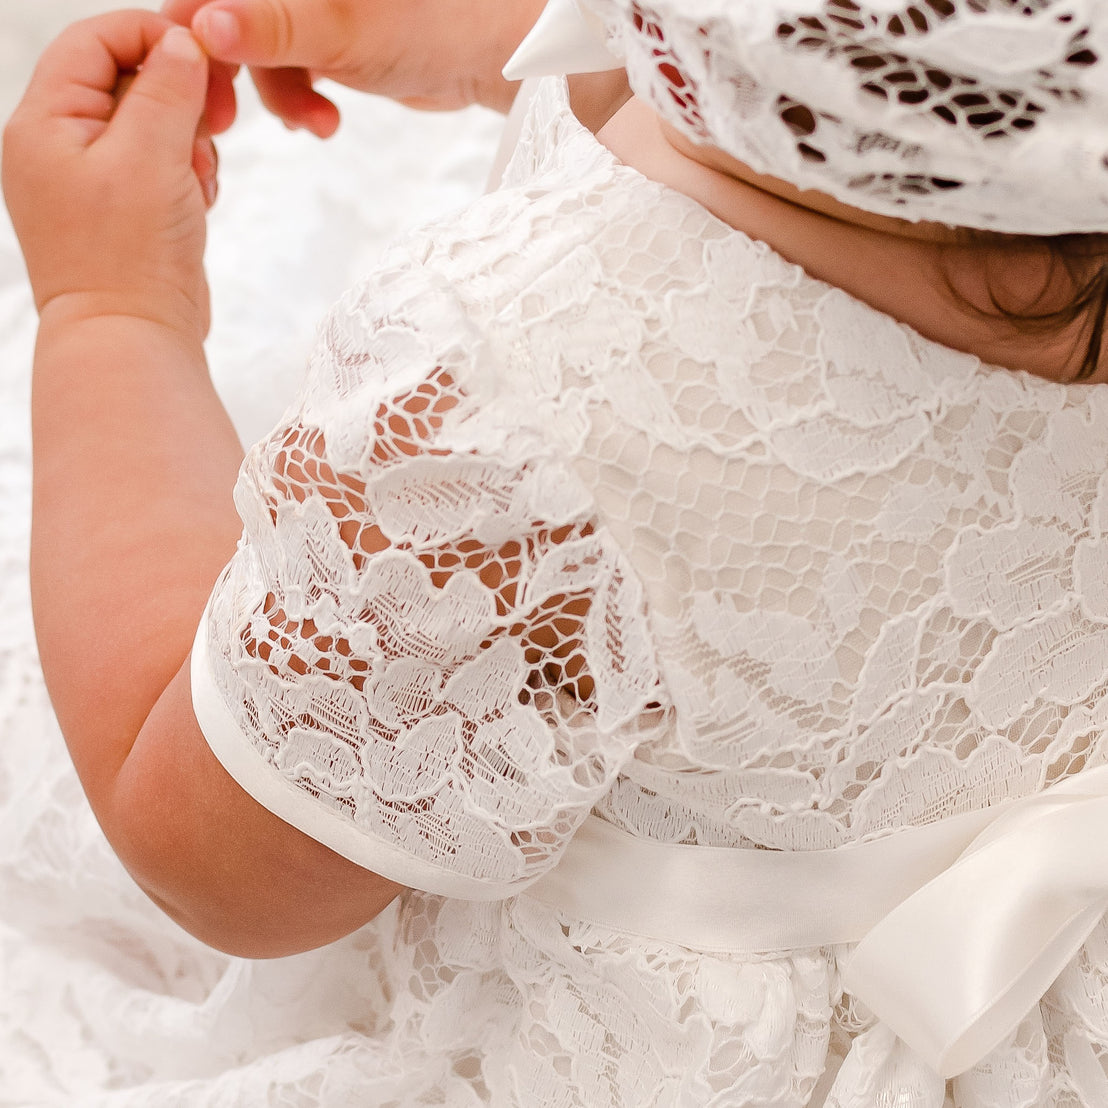 A close-up of a baby dressed in the Rose Christening Gown & Bonnet for baptism, holding an adult's finger. The baby also wears a lace bonnet.